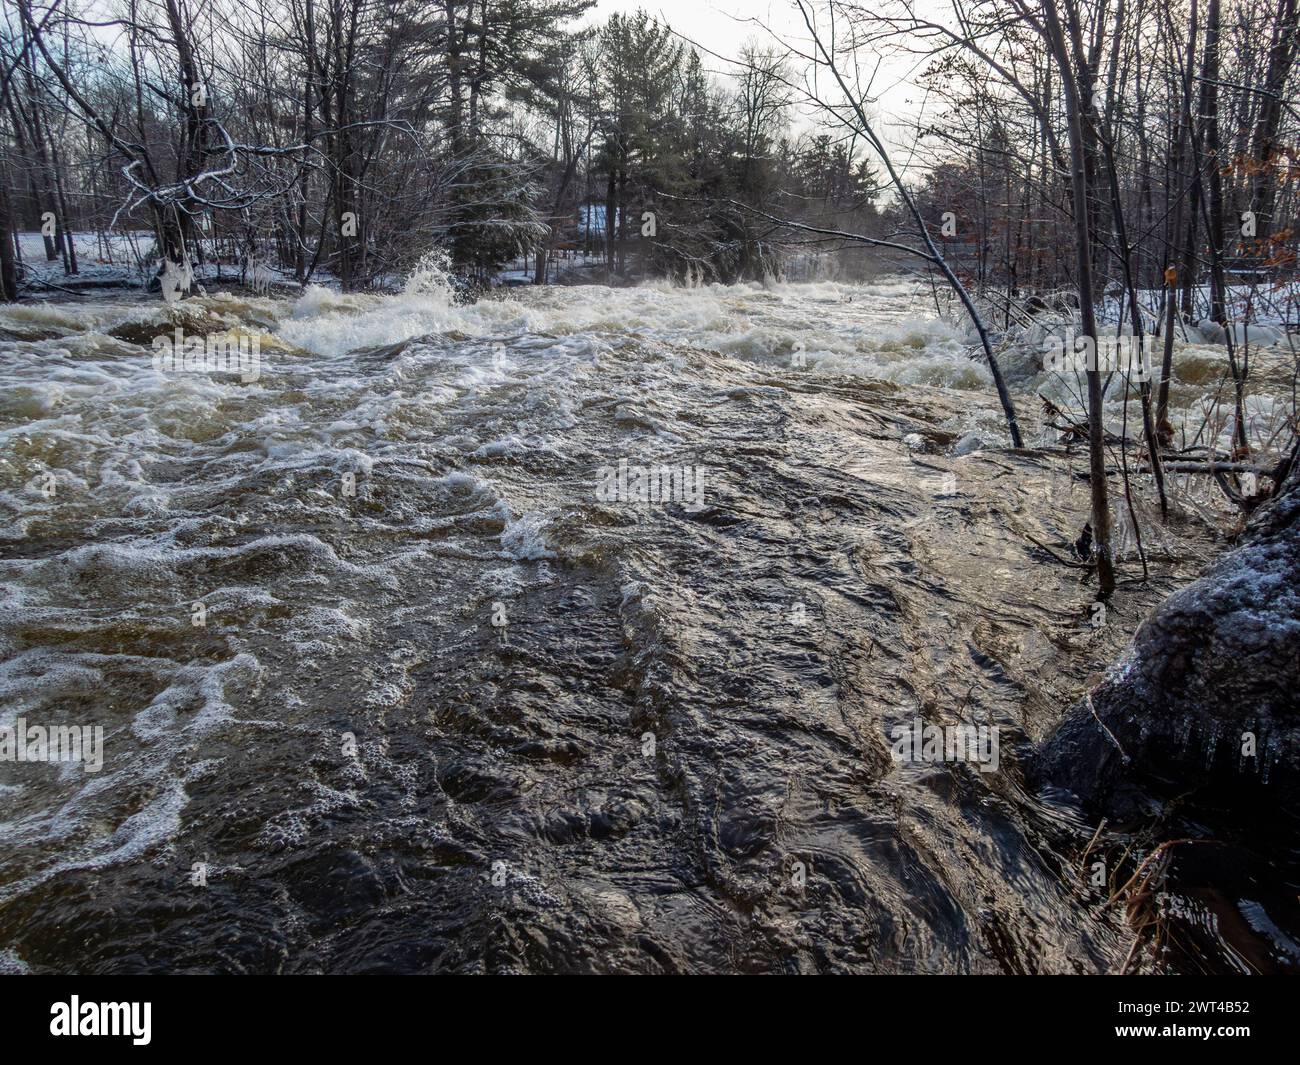 West River overflowing its banks at Brownsburg waterfall, Brownsburg-Chatham, Quebec, Canada Stock Photo